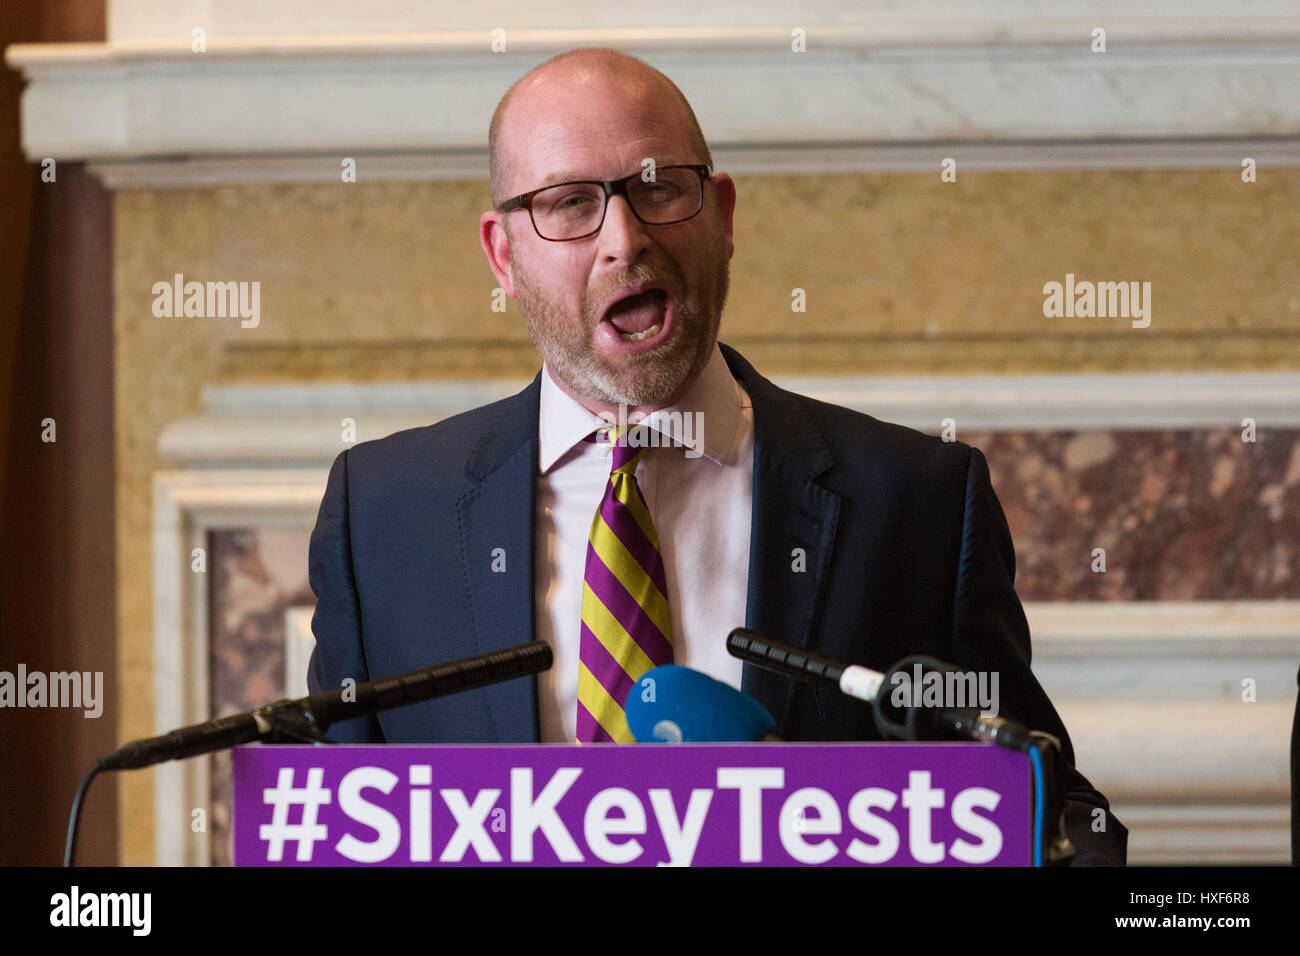 London, UK. 27 March 2017. Ahead of the Prime Minister triggering Article 50 this week, UKIP Leader Paul Nuttall sets out six key tests by which the country can judge Theresa May's Brexit negotiations. Keynote speech at the Marriott County Hall in Westminster. Stock Photo